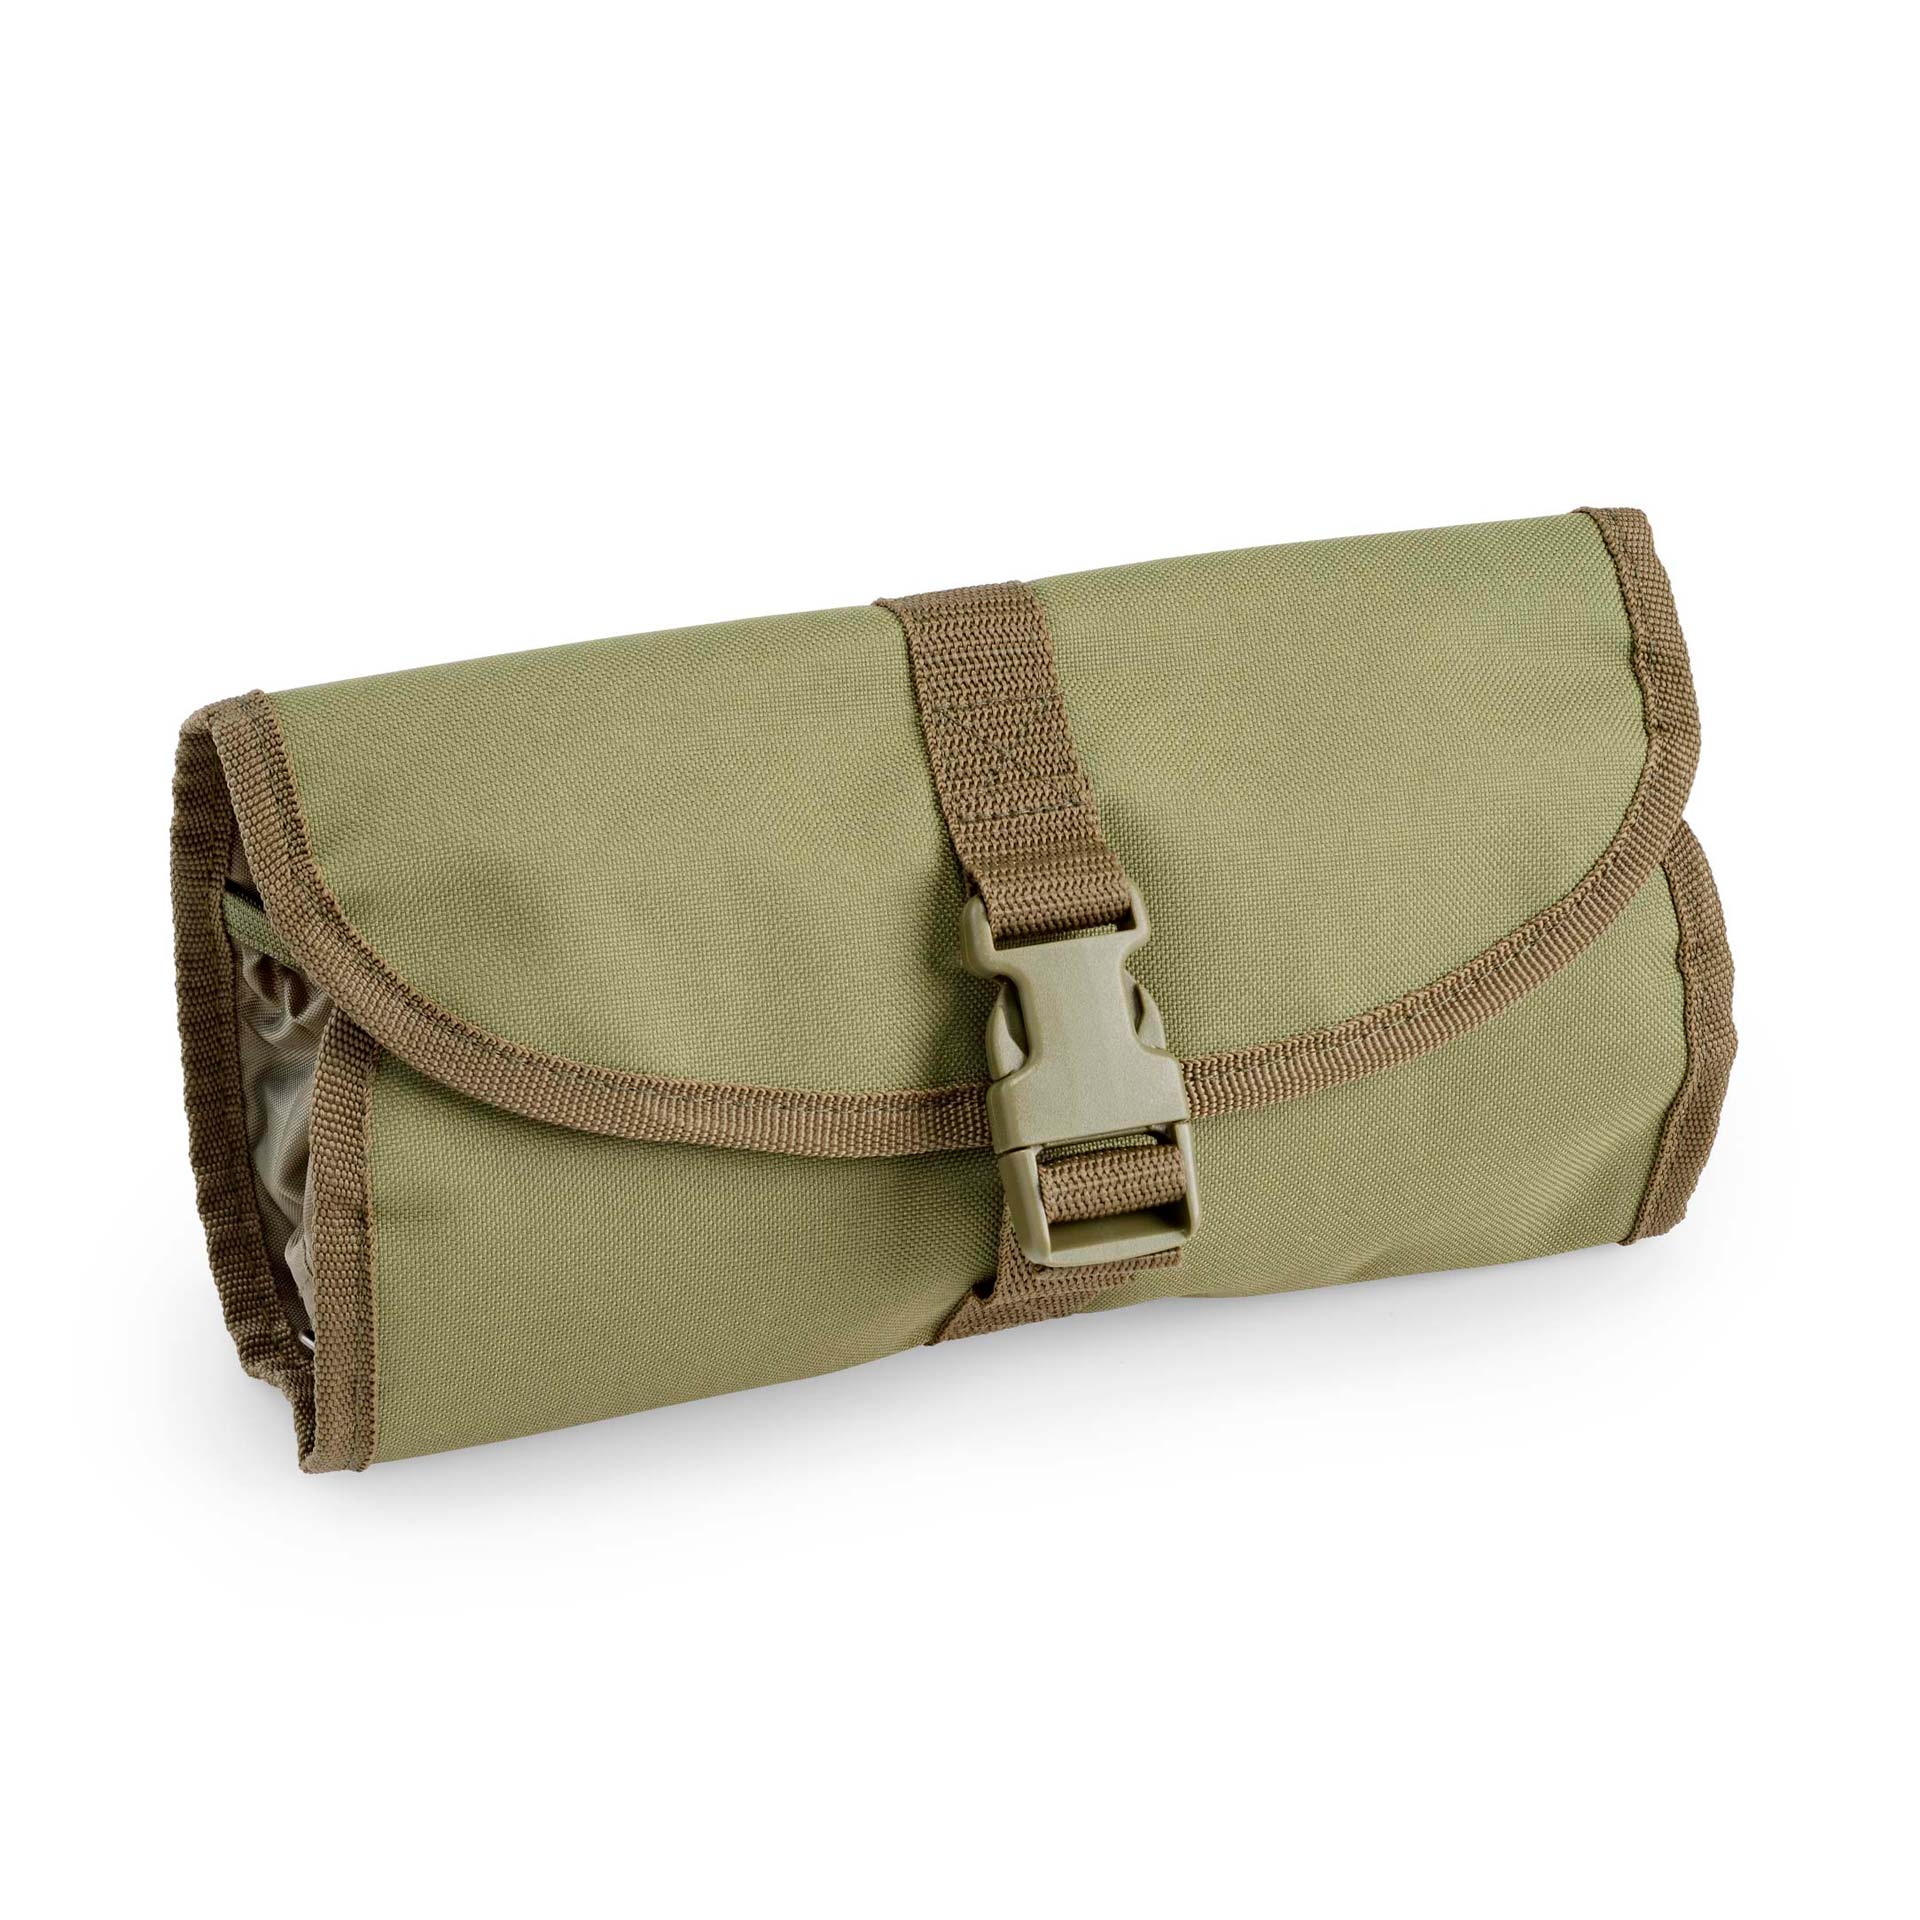 OPENLAND BEAUTY CASE PICCOLO - Borse - Openland Tactical N.ER.G.